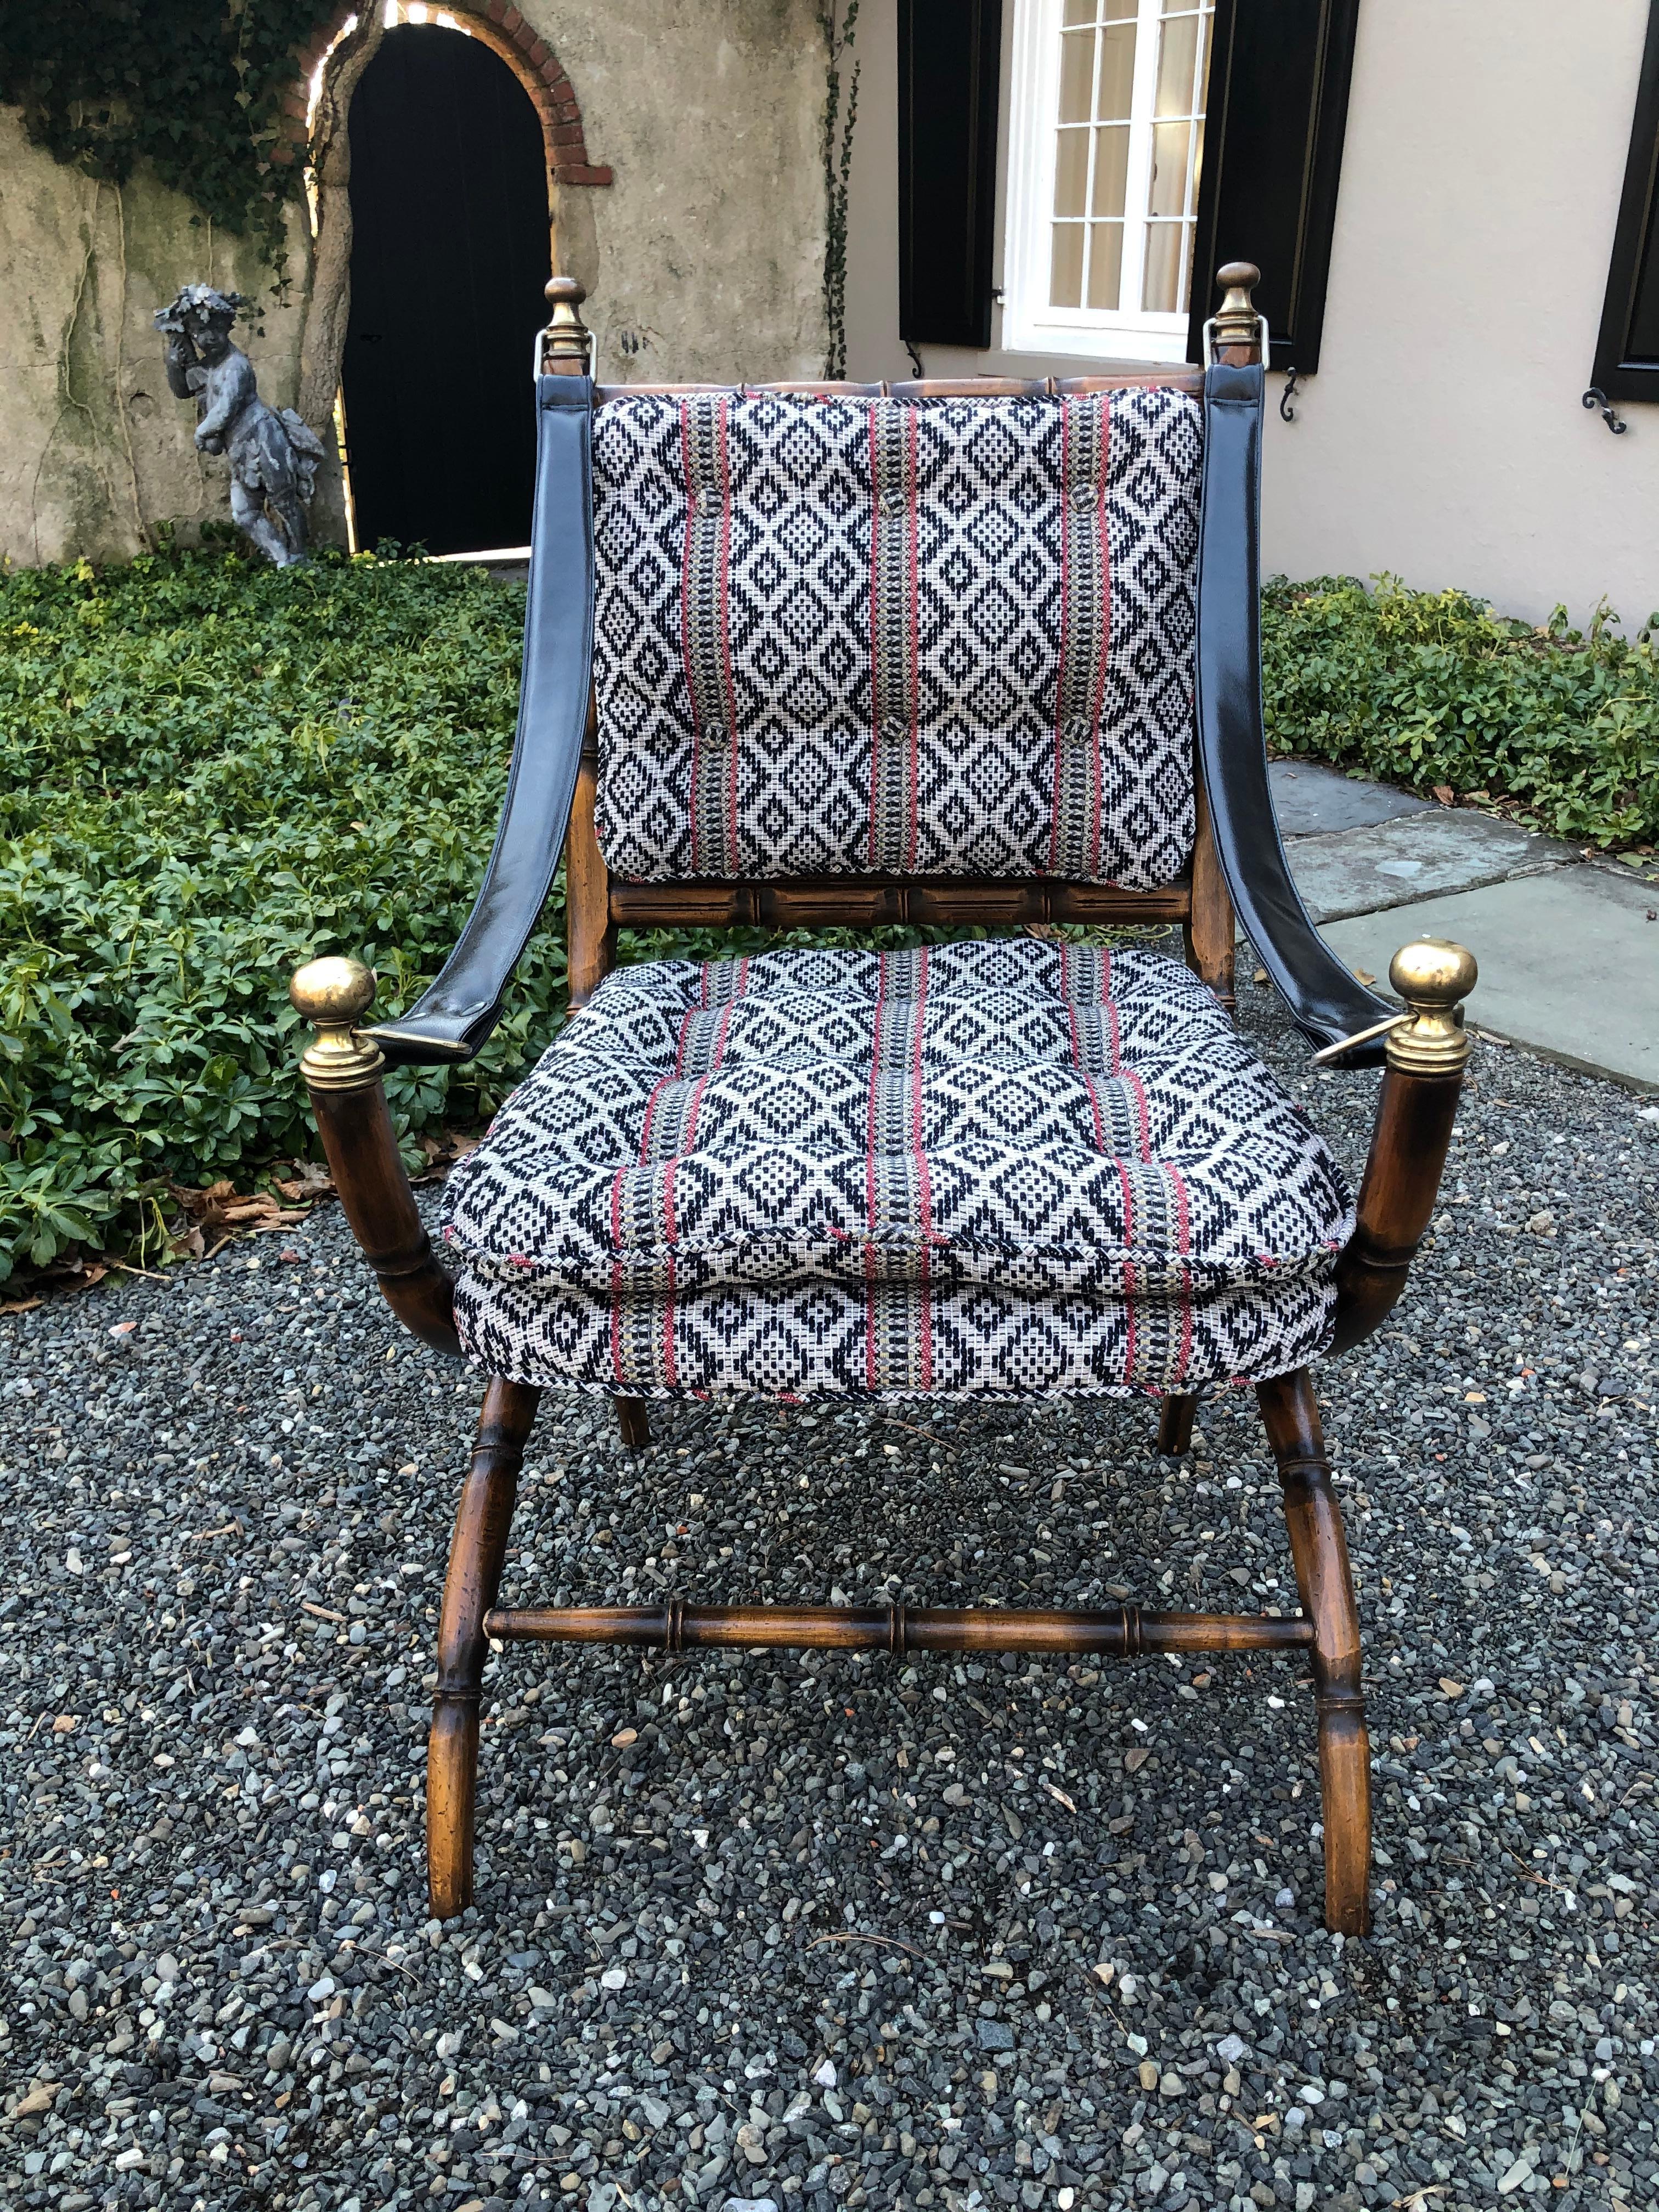 Fascinating campaign safari chair in a faux bamboo wood. The seat and back are cane with newly upholstered tufted cushions. The cushions are fixed to the chair with buttons. Leather straps serve as the arms and are attached with brass hardware and